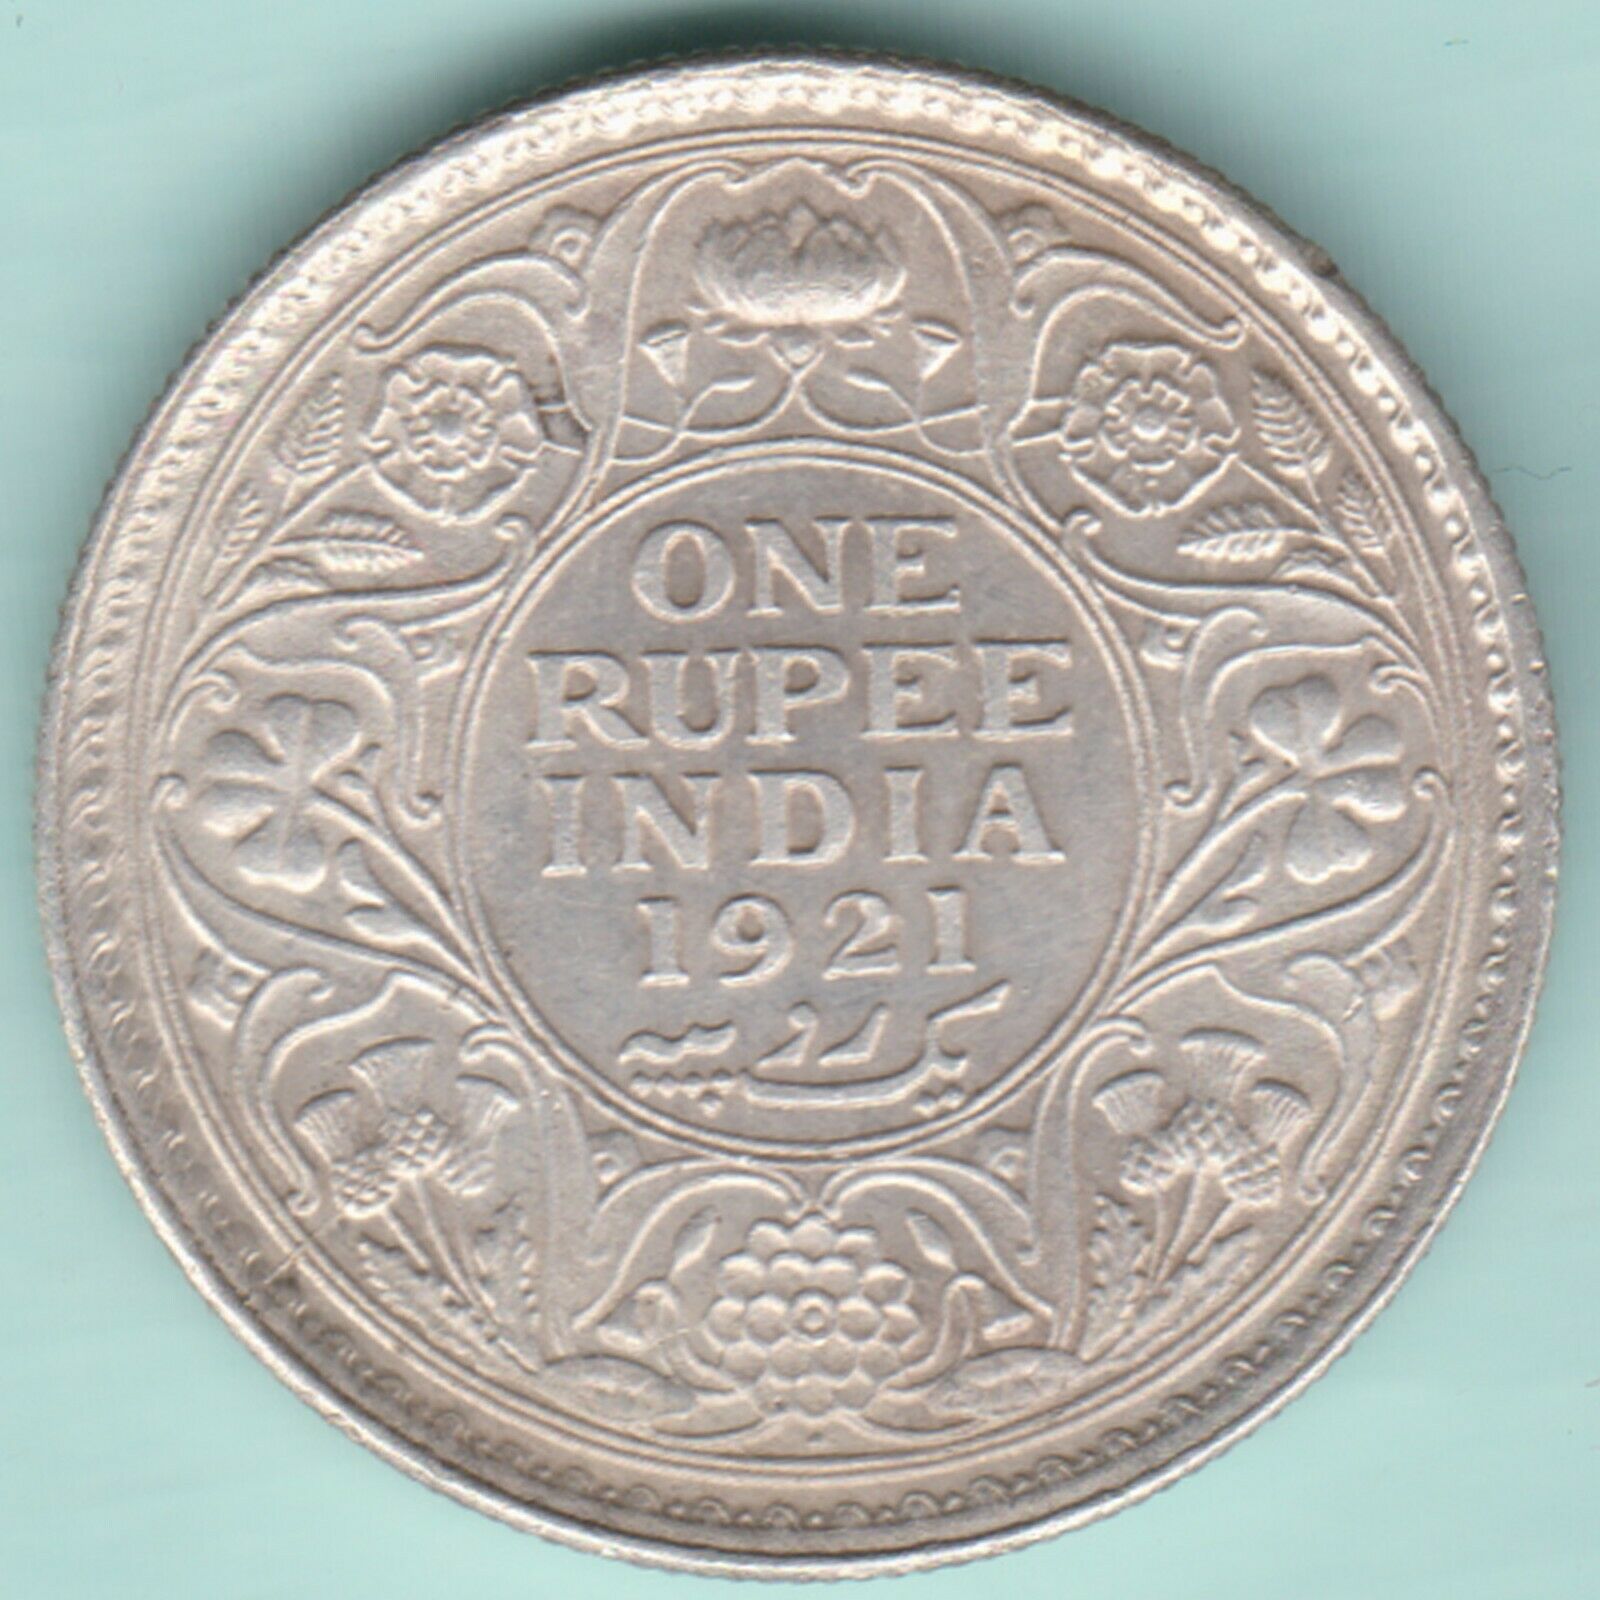 BRITISH INDIA 1921 KING GEORGE V ONE RUPEE SILVER COIN NEAR ABOUT UNC